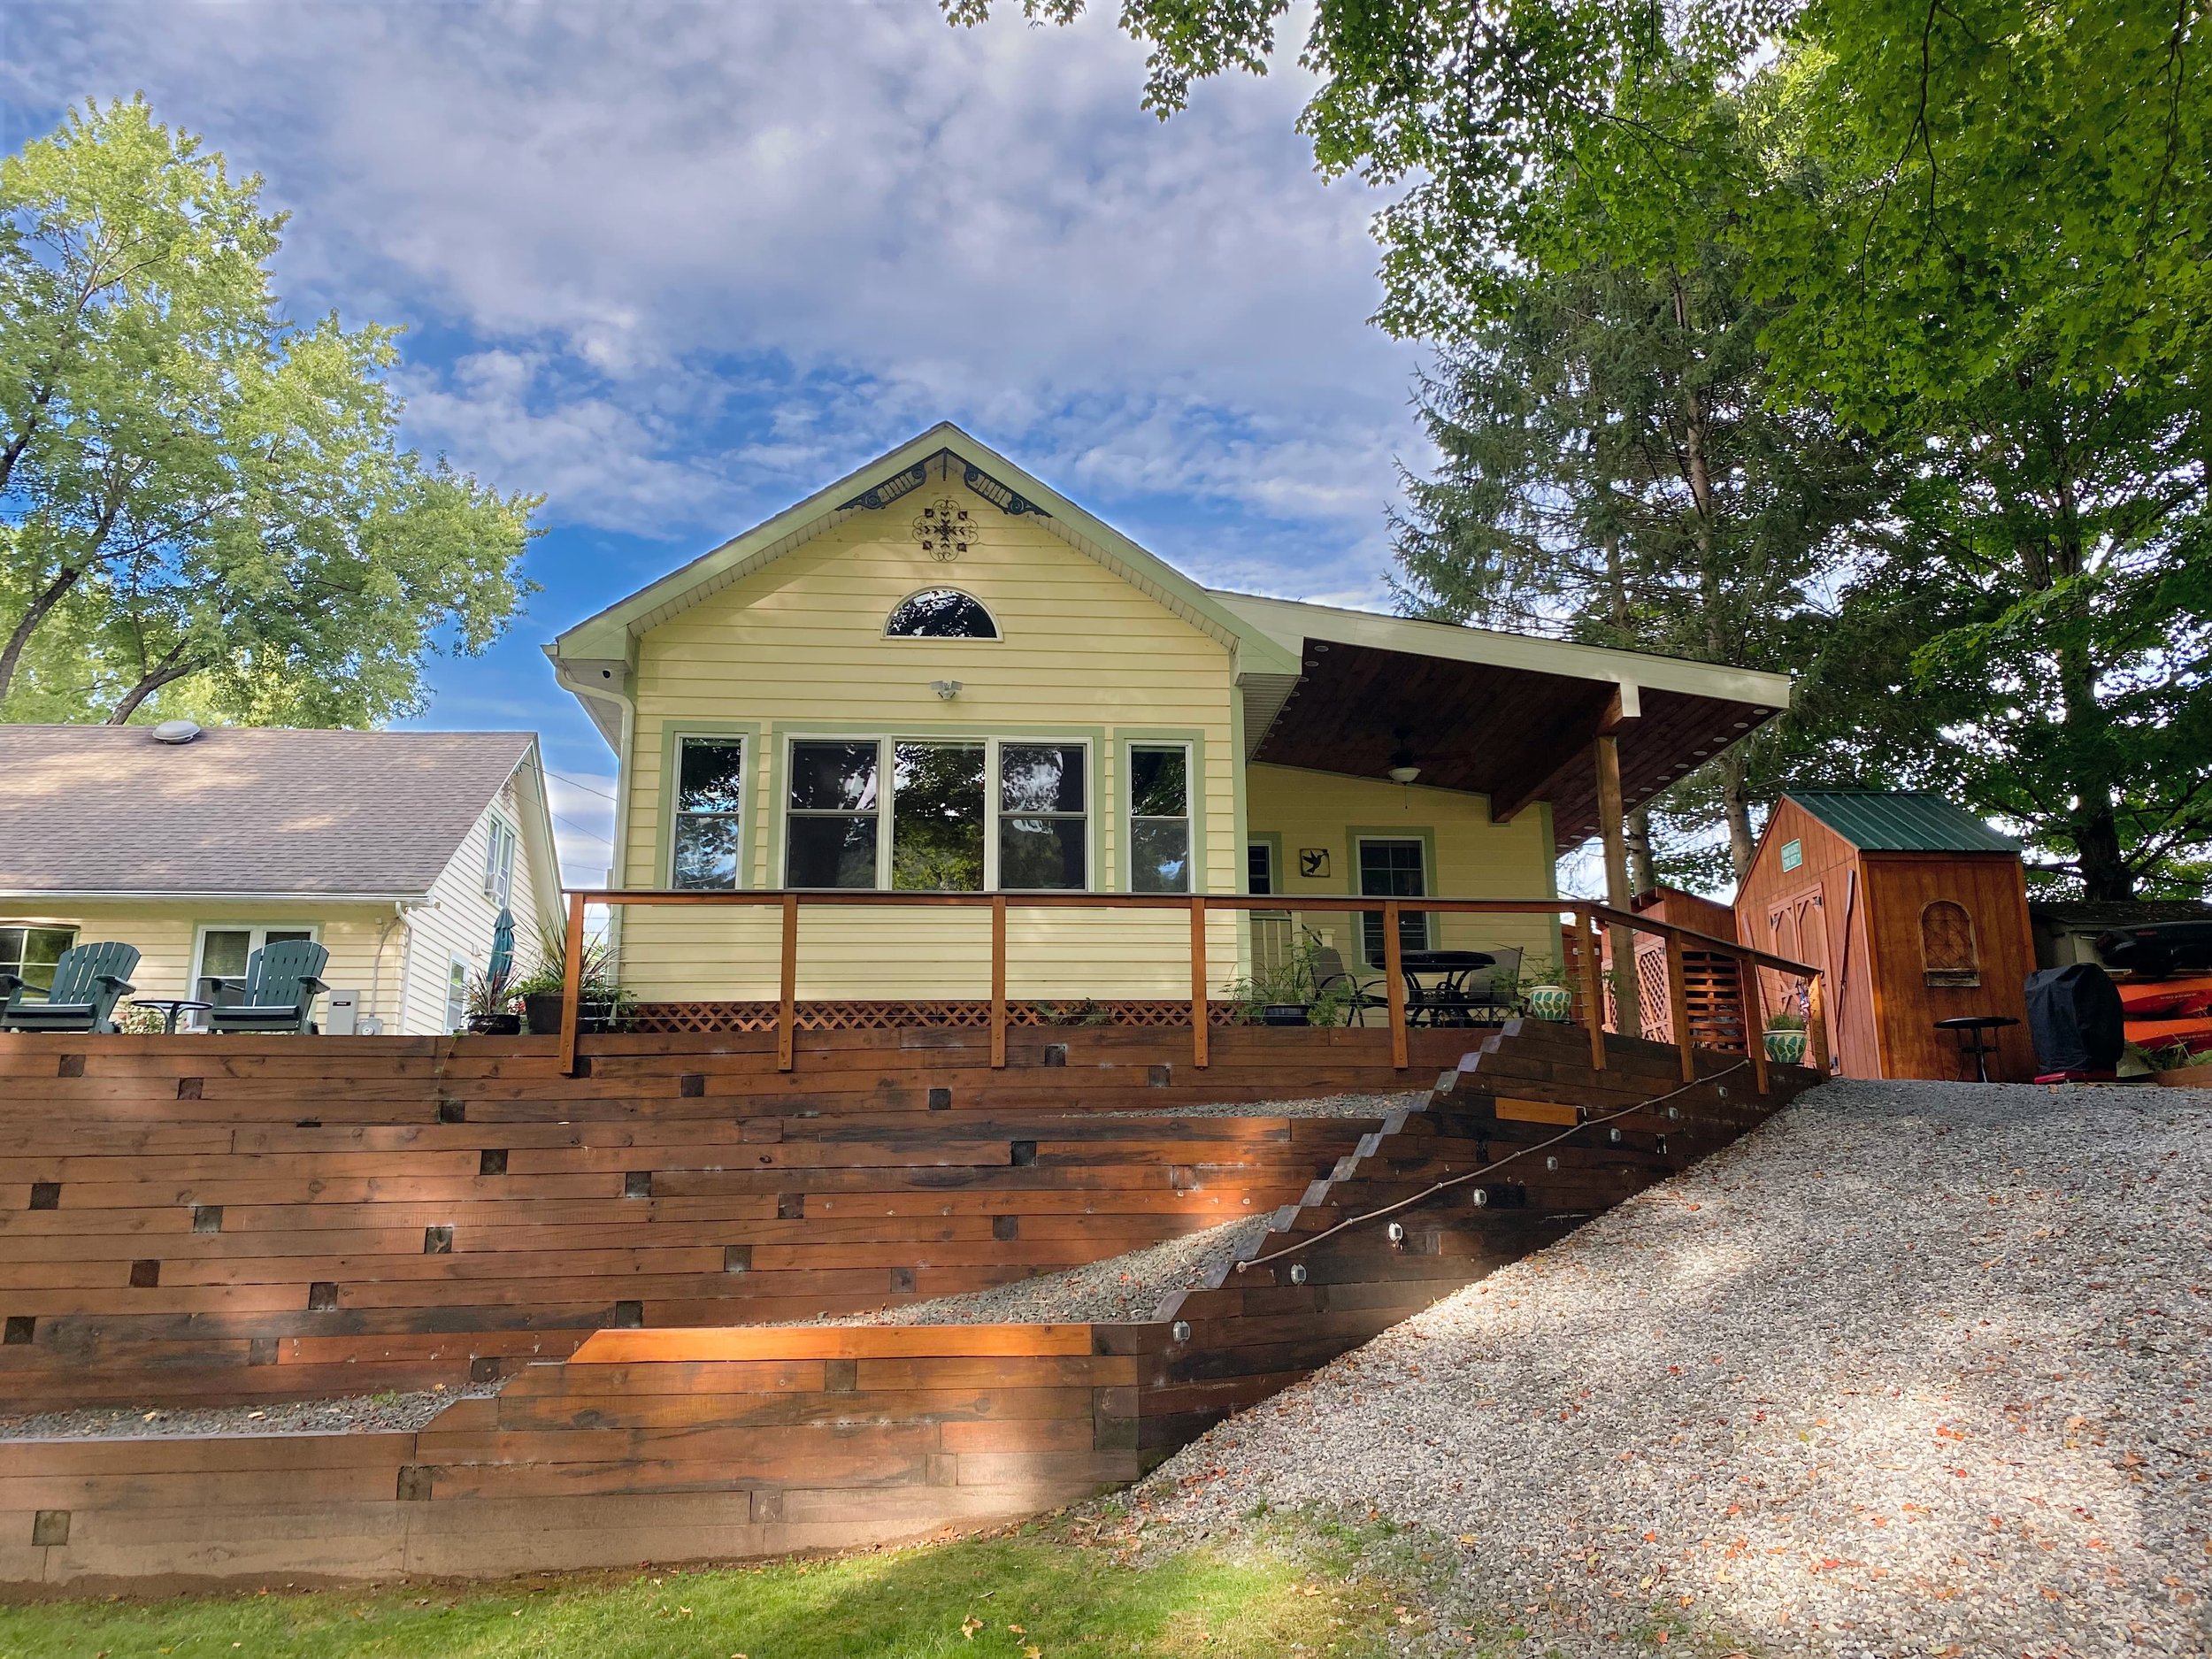 Mission Possible Airbnb_Narrowsburg New York.JPG